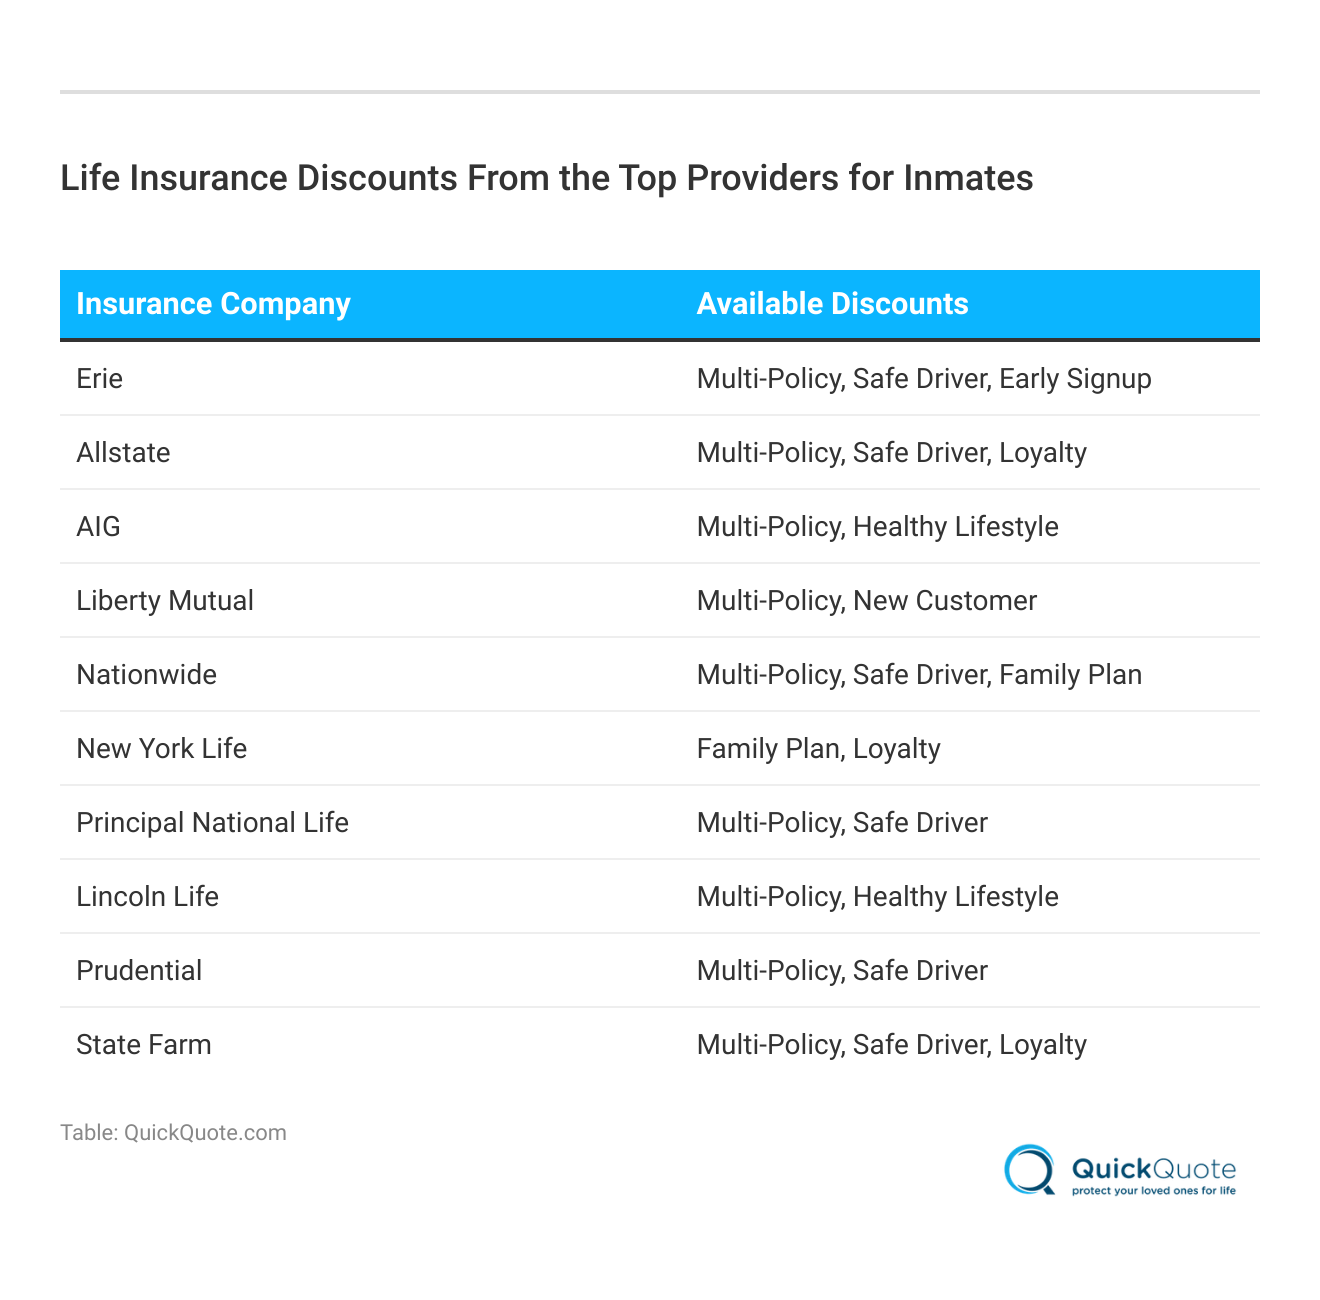 <h3>Life Insurance Discounts From the Top Providers for Inmates</h3>